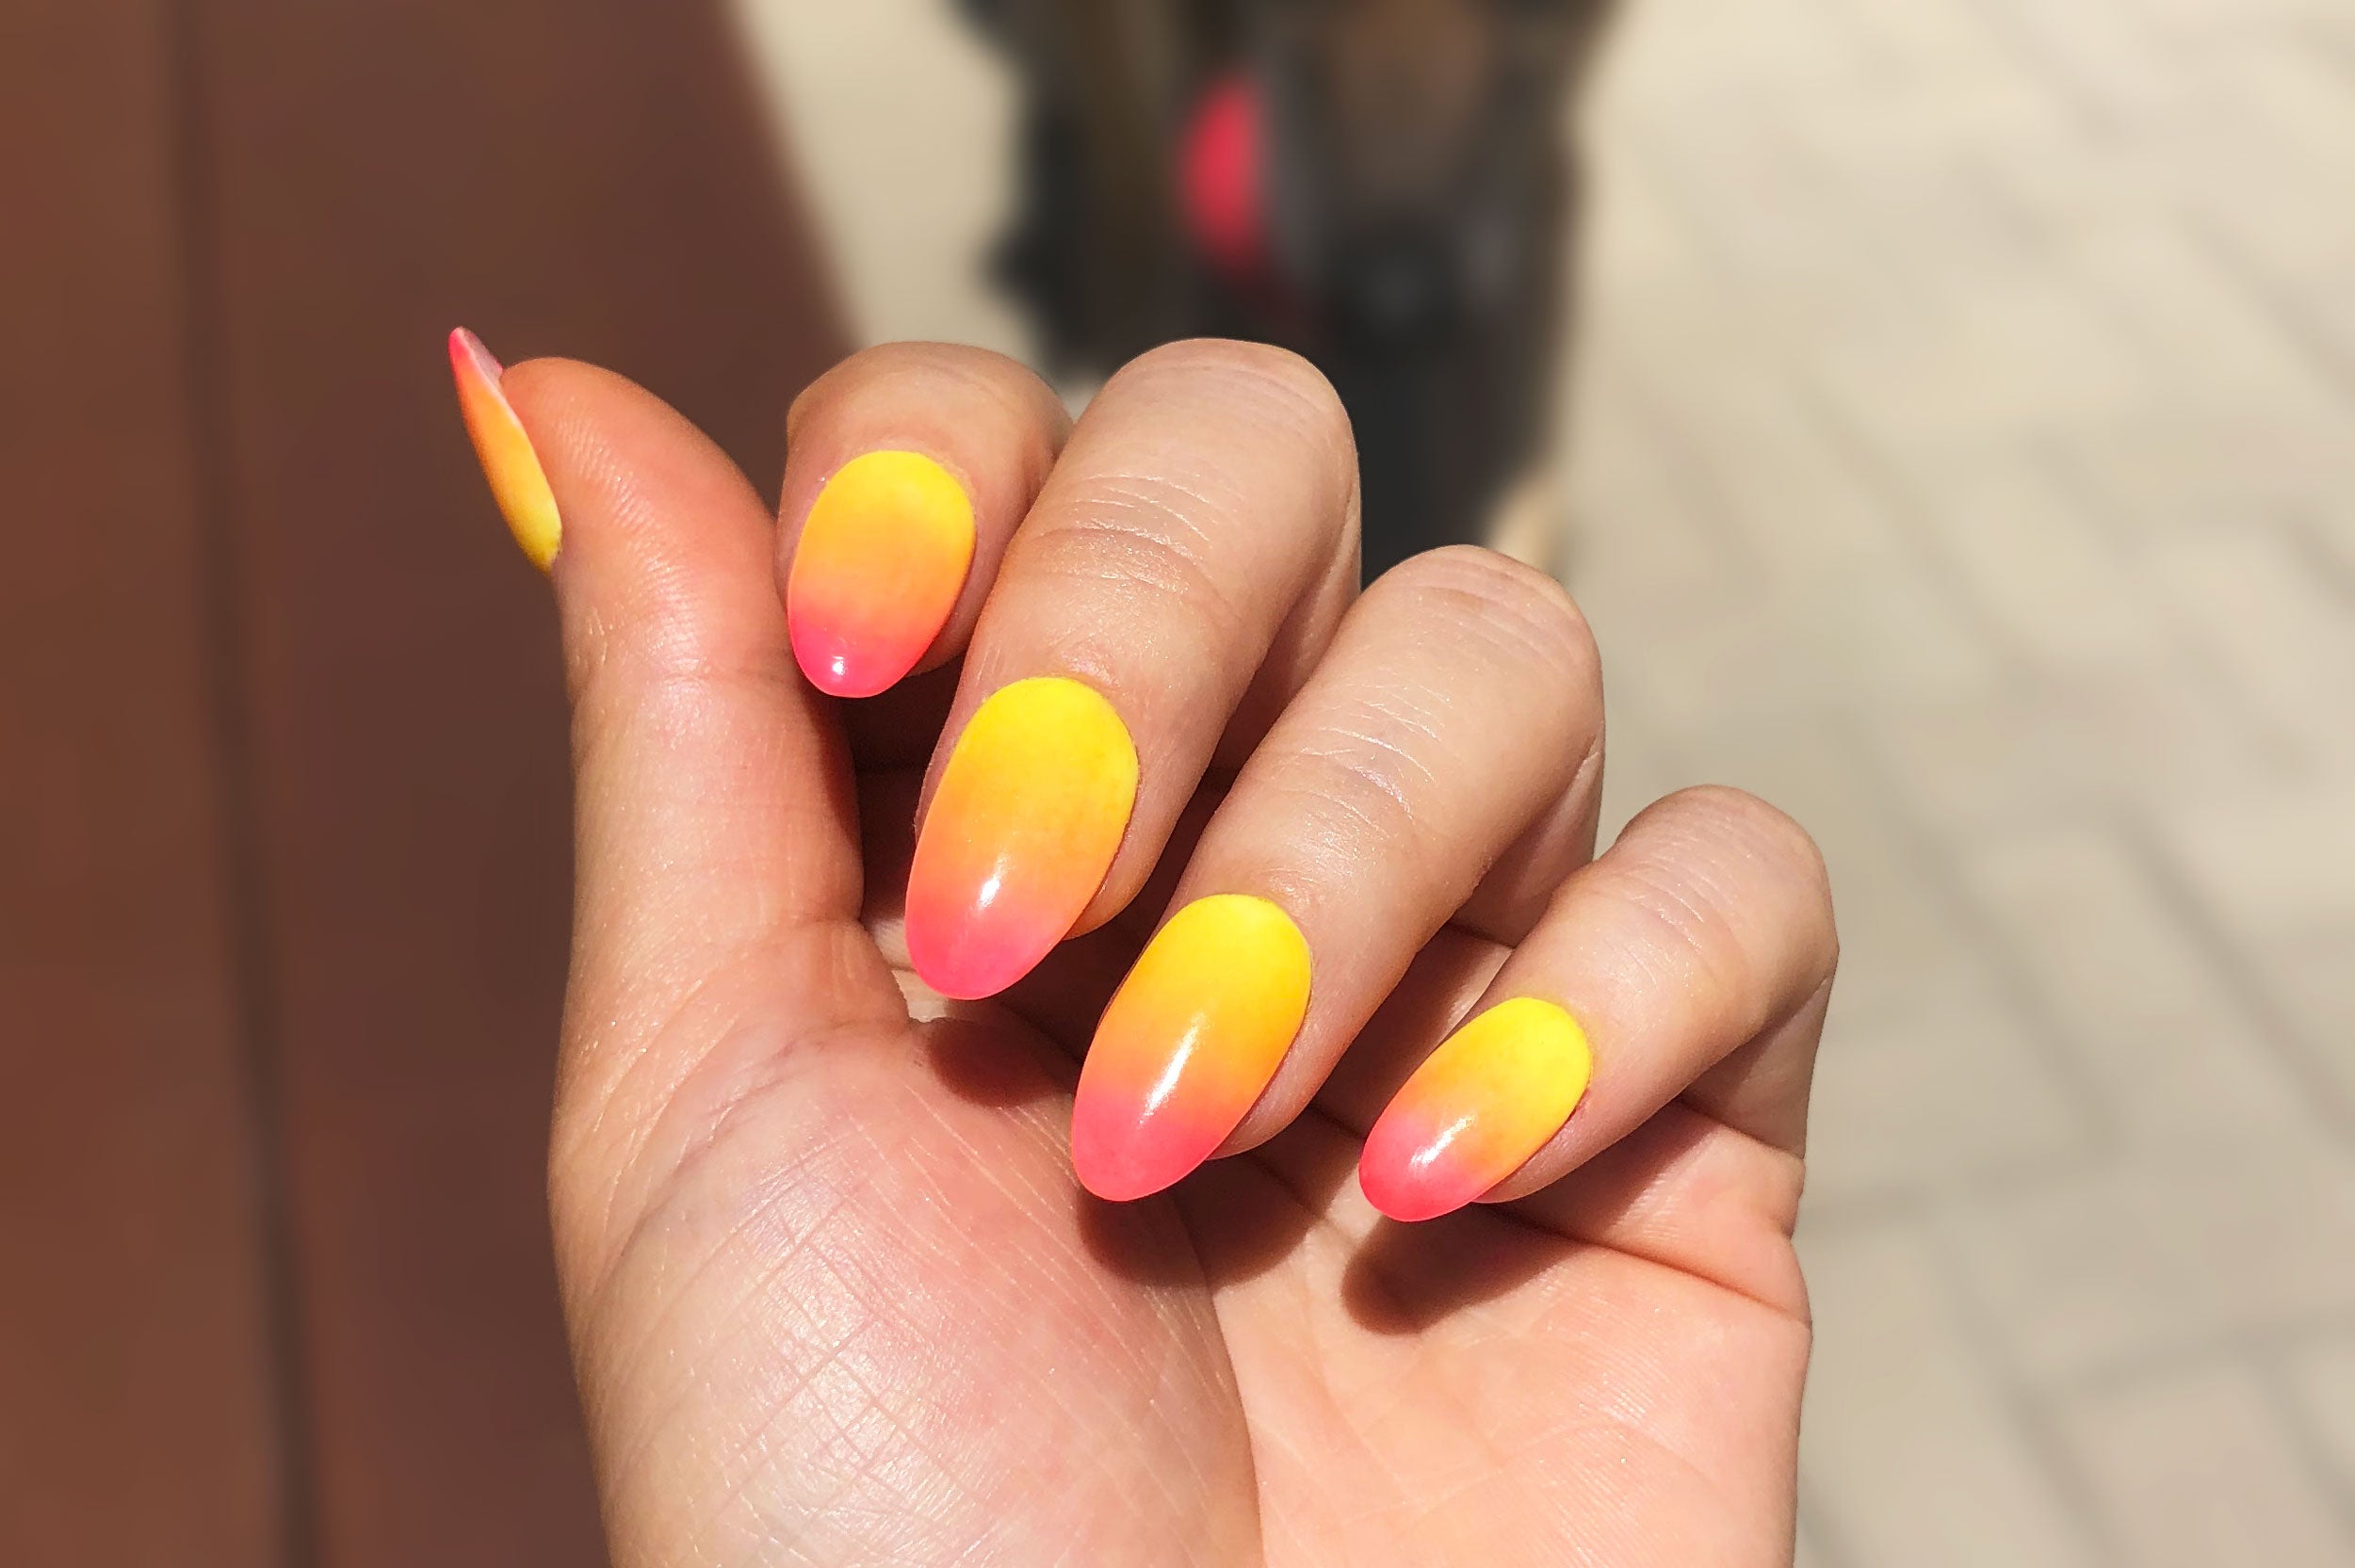 1. Sunset Ombre Nails - wide 6